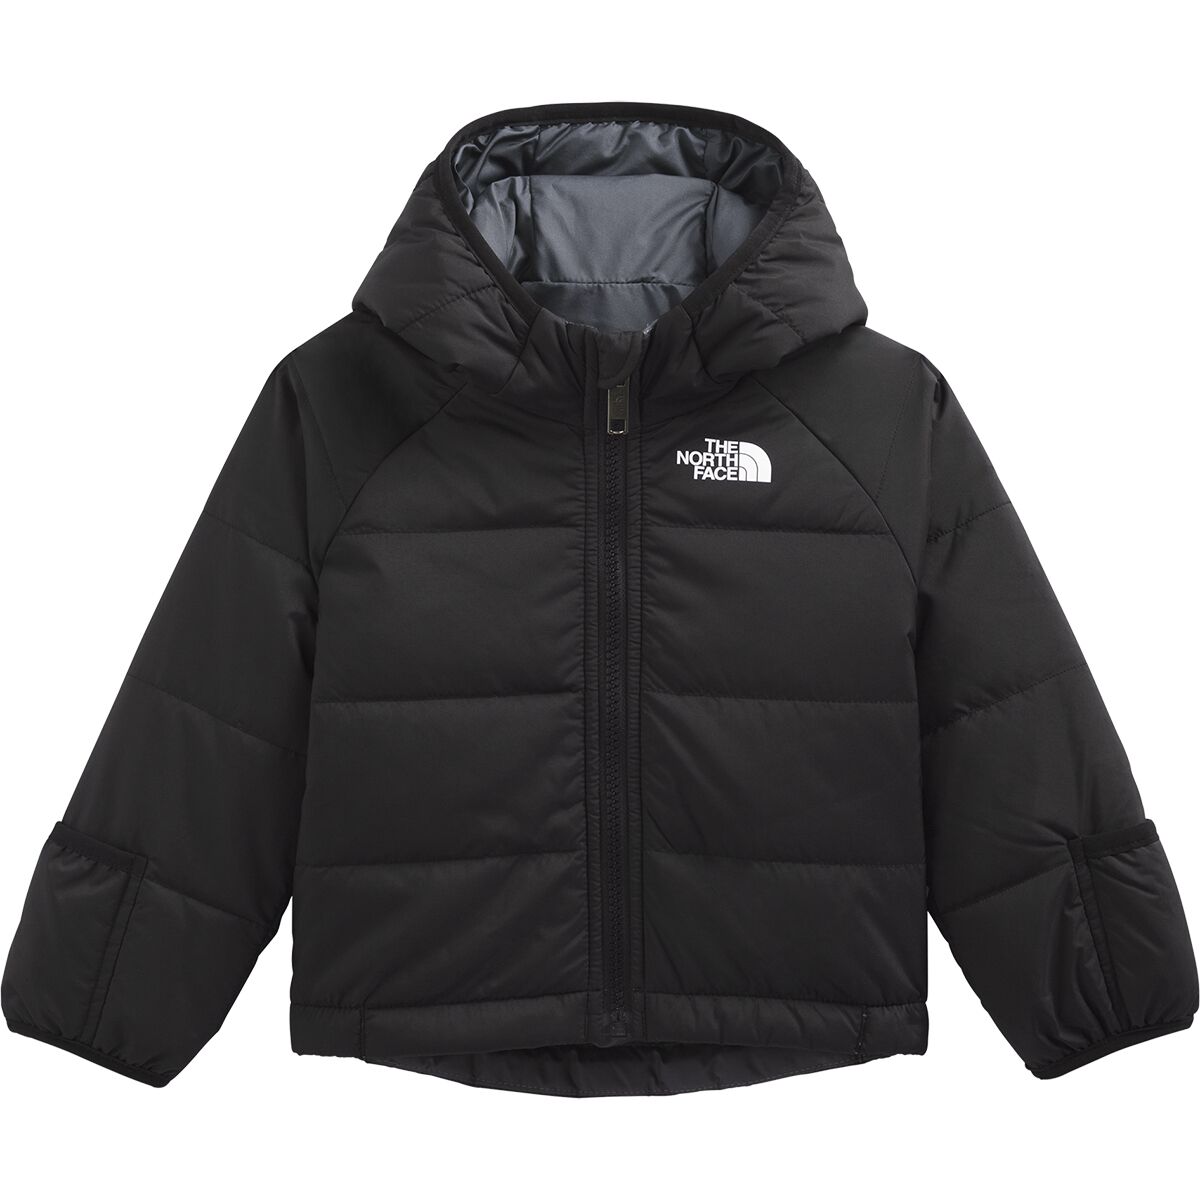 The North Face Perrito Reversible Hooded Jacket - Infant Boys'